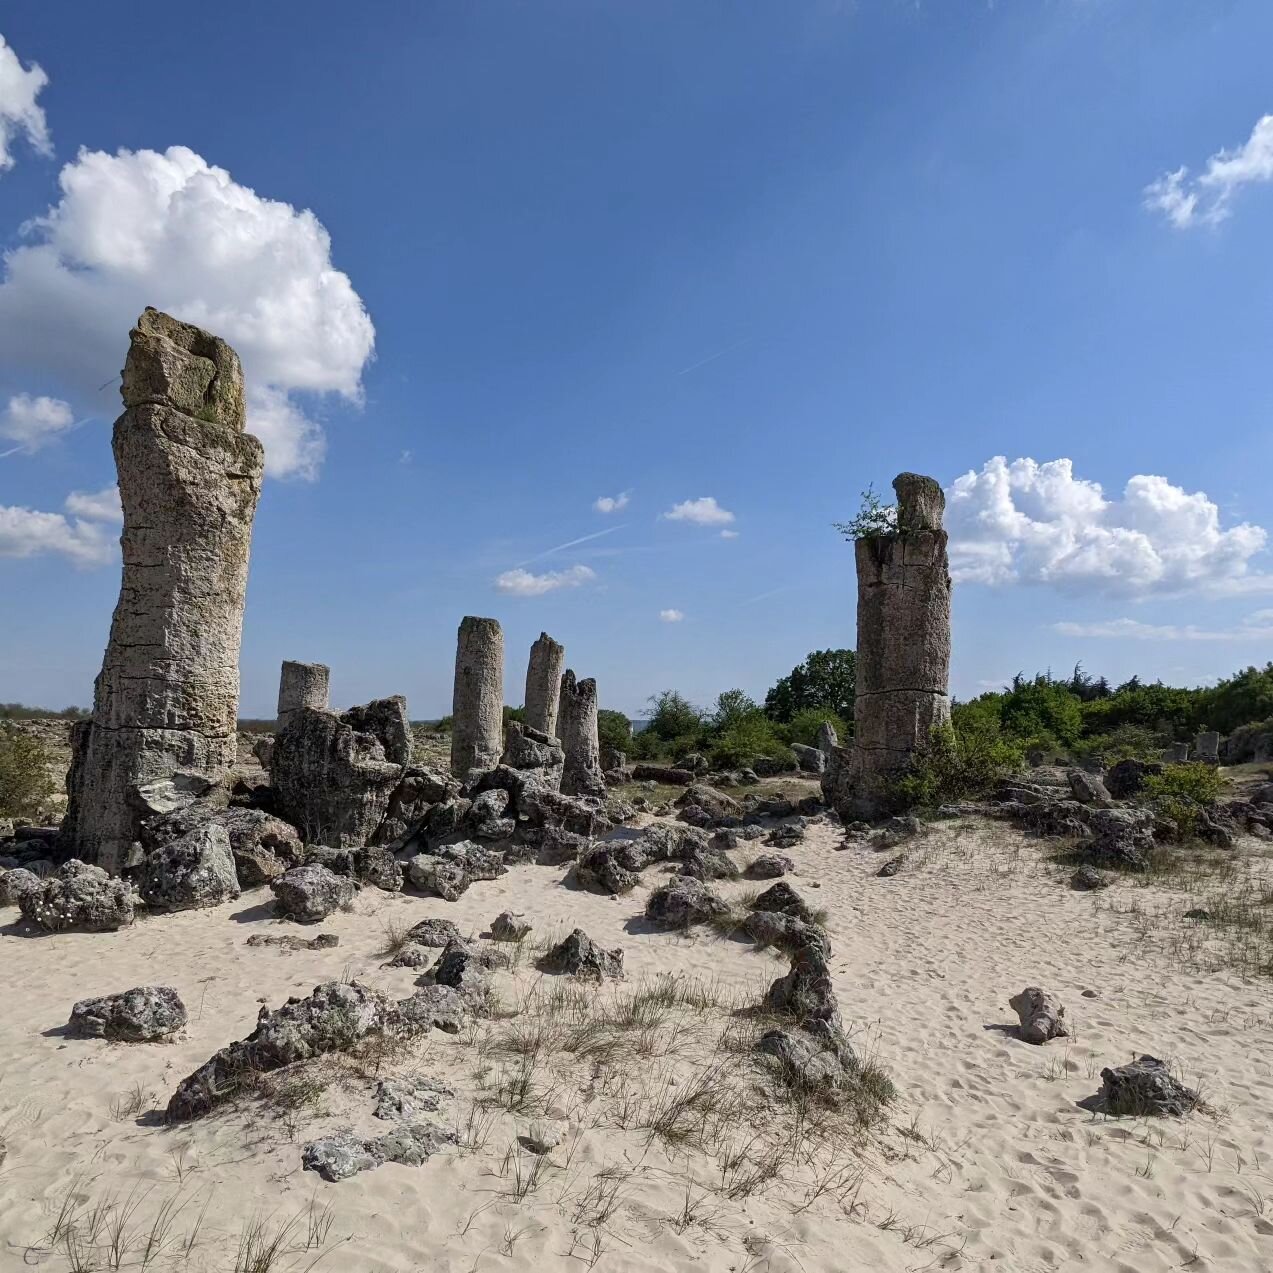 All rock, no roll 🤘

Only one of these is said to look like a &quot;fertility symbol&quot; - I feel like  there are a couple of competitors for that though.

A visit to The Stone Forest - a mini desert with these natural stone columns found outside 